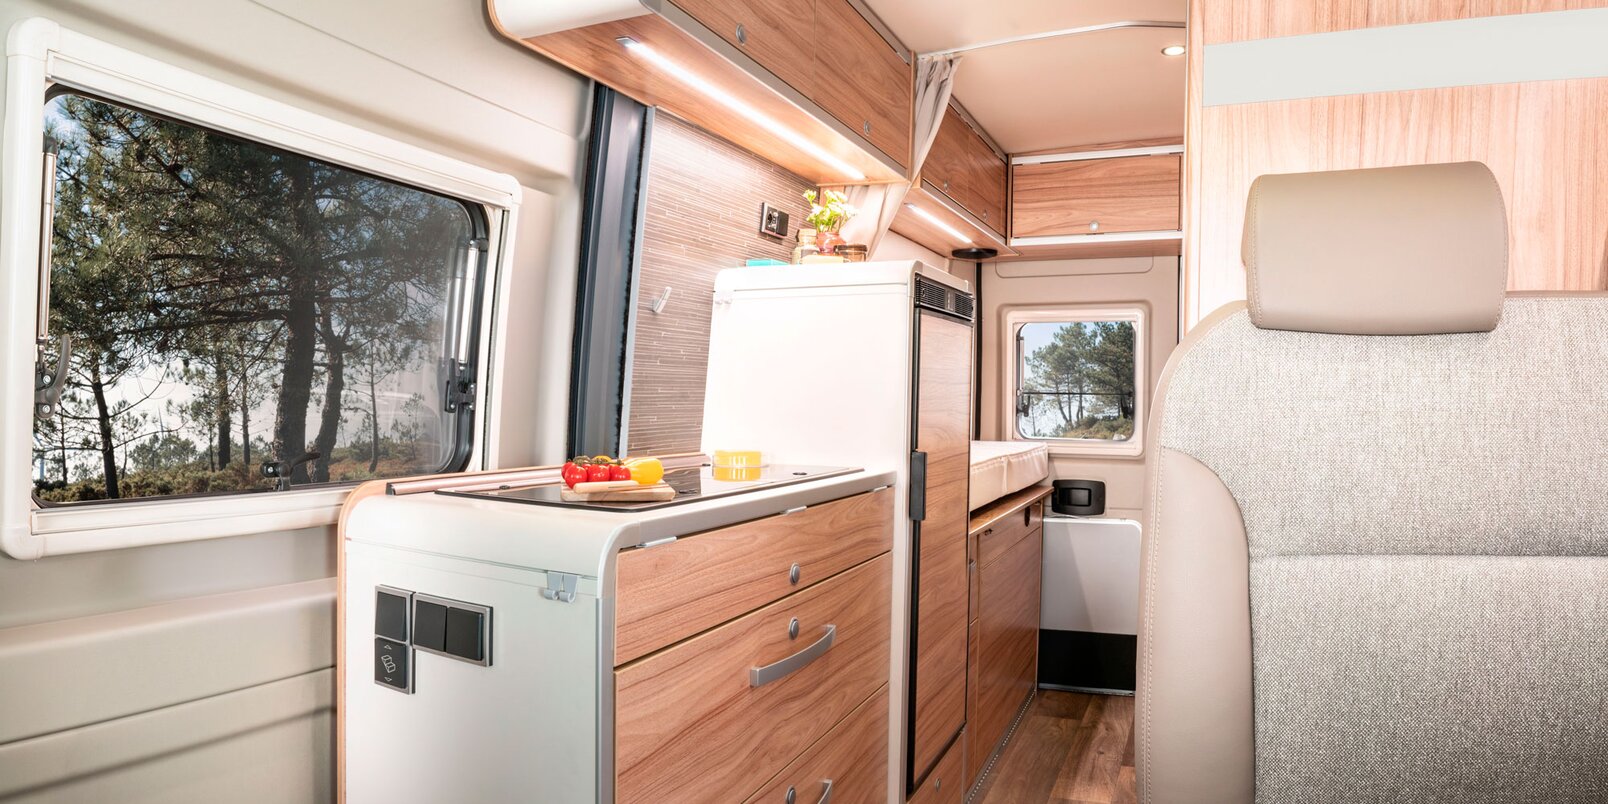 Bench, entrance door, kitchen area with refrigerator and storage cupboards in the HYMER Fiat Camper Van